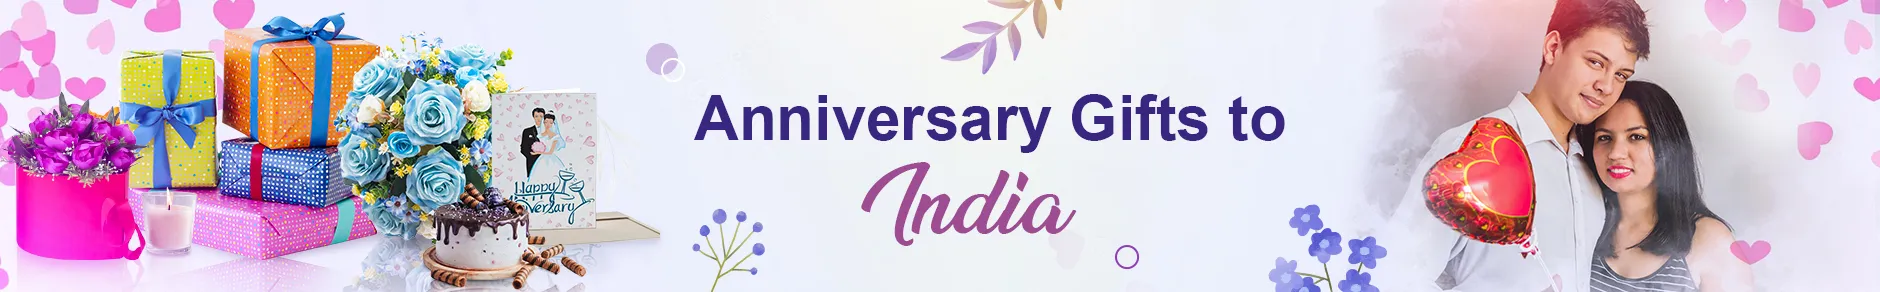 Online Anniversary Cake | Send Anniversary Cakes to Hyderabad | Same Day Delivery, Free Shipping